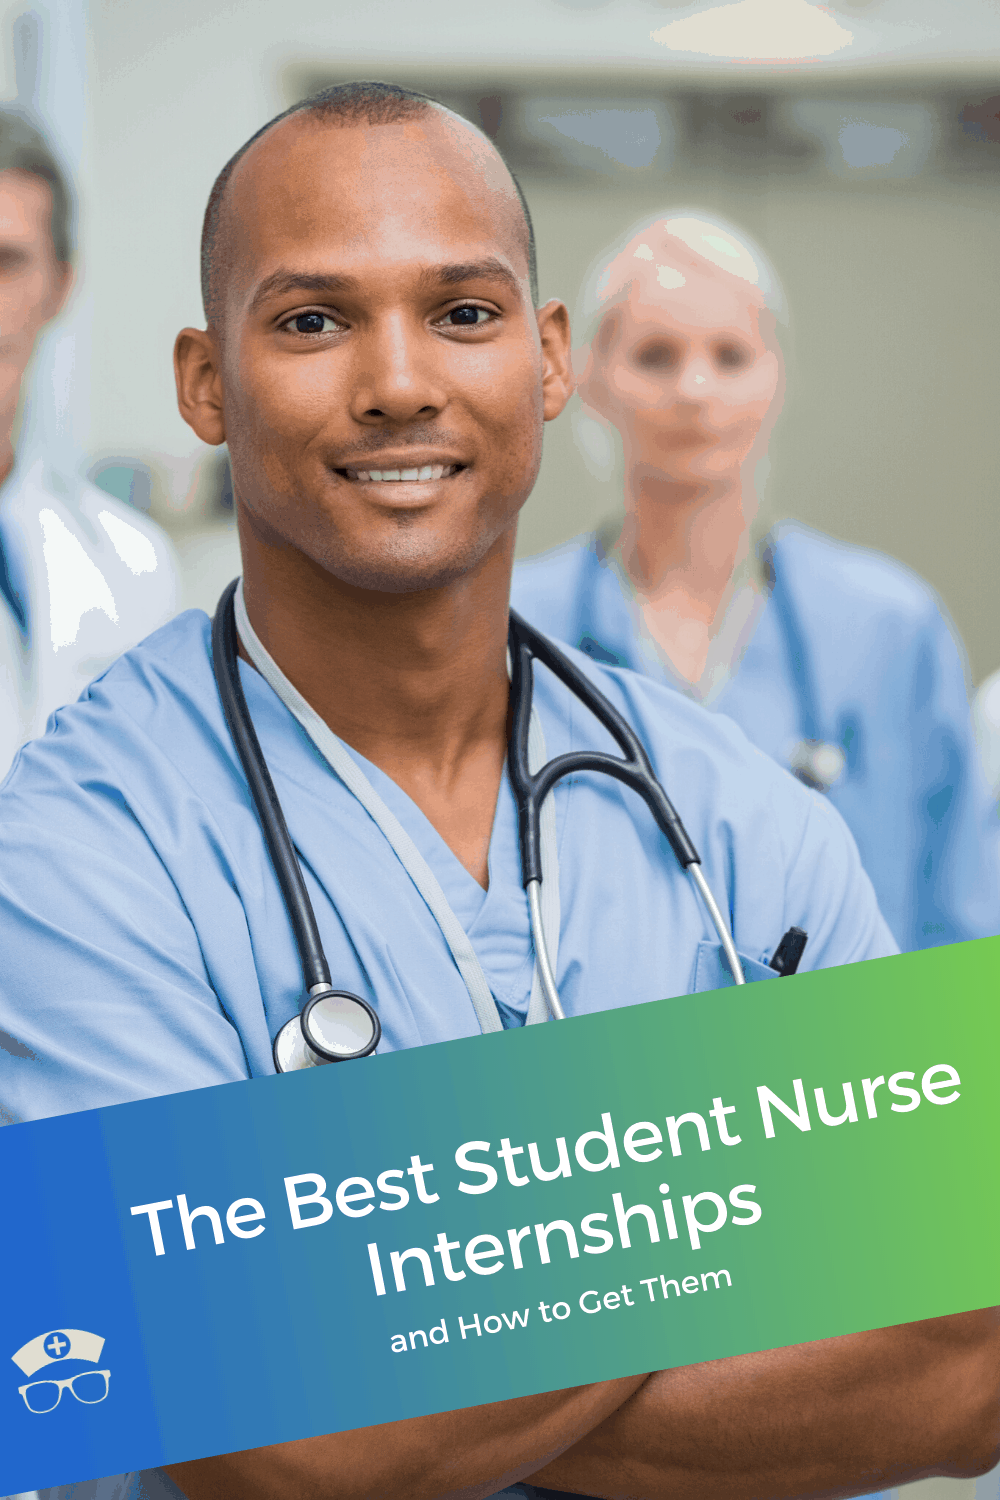 The Best Student Nurse Internships And How To Get Them